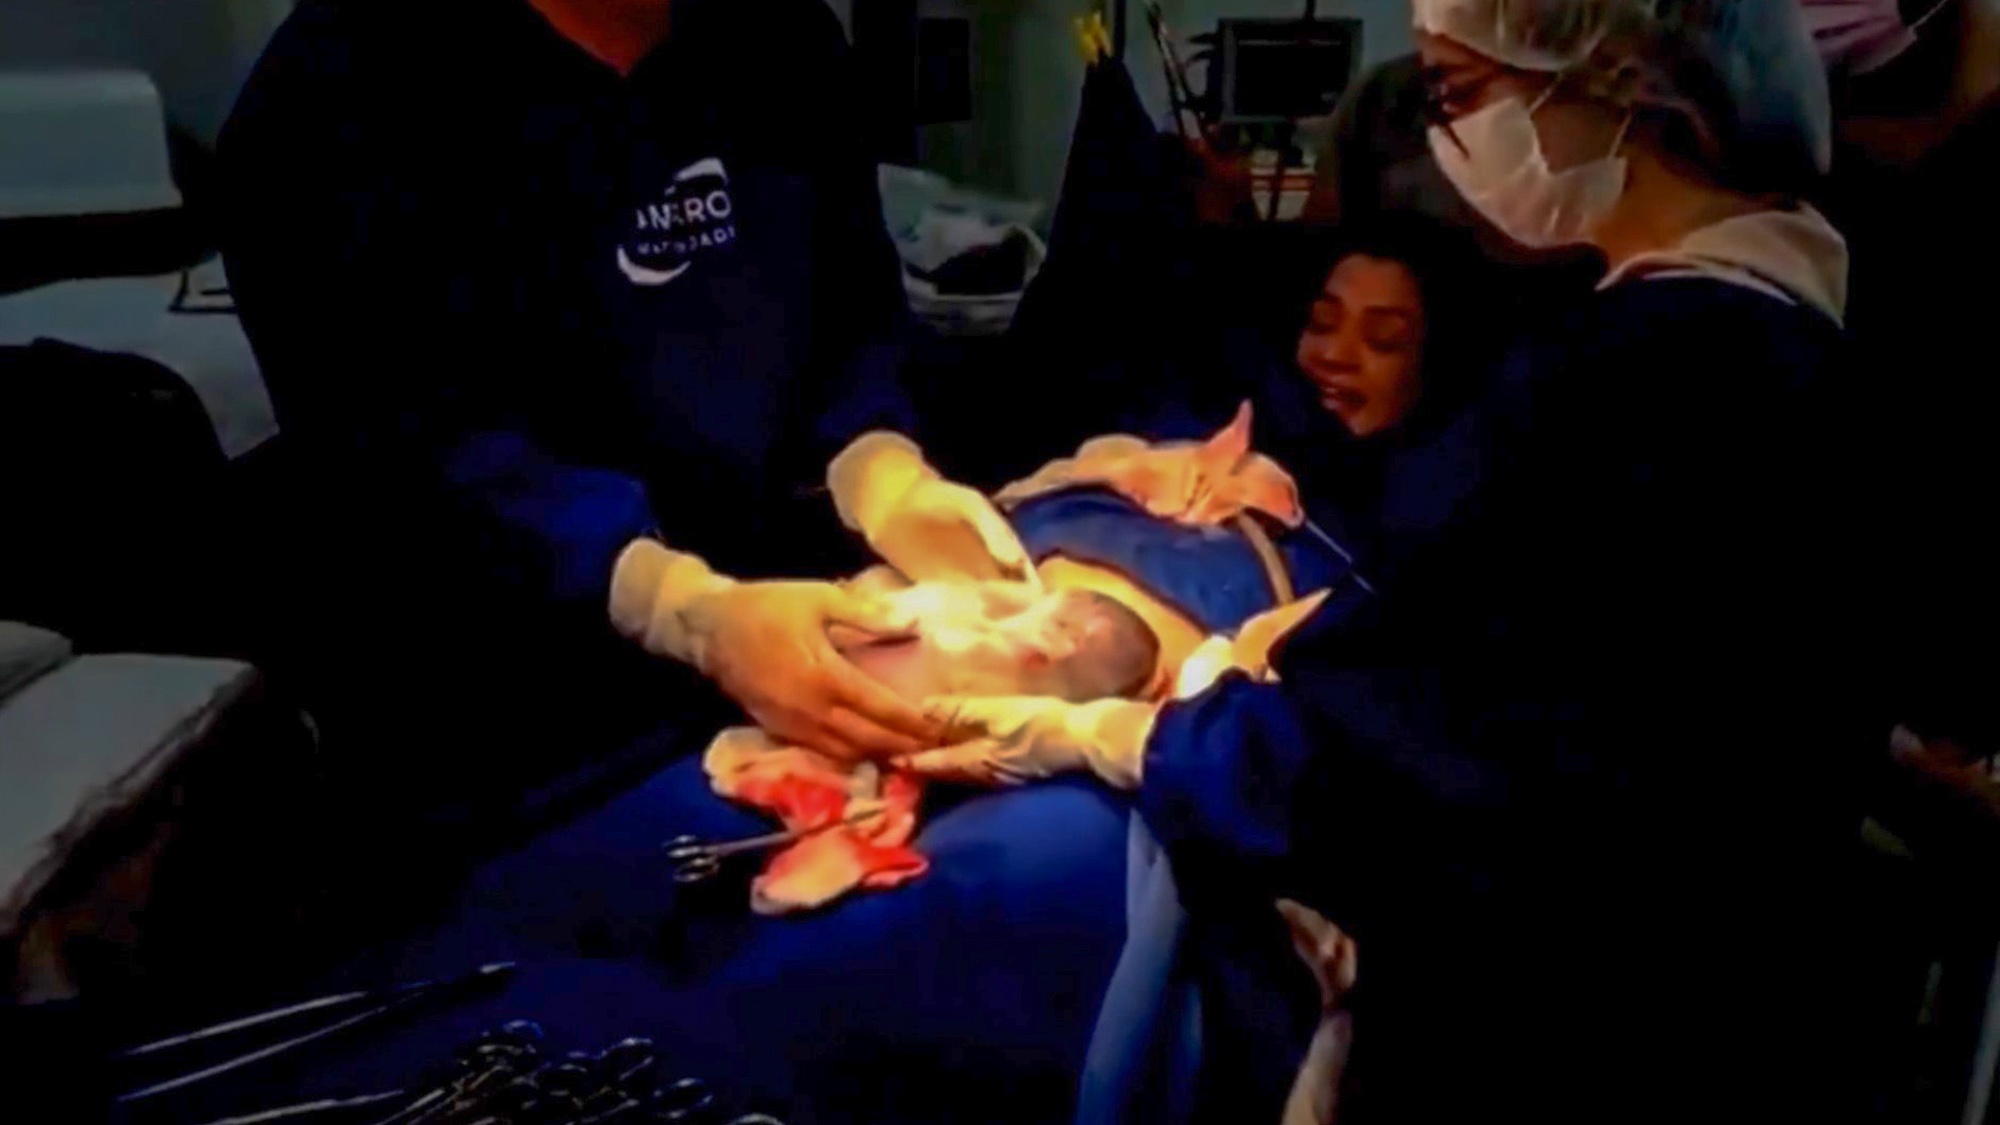 Read more about the article Incredible Moment Baby Breaks Own Amniotic Sac With Tiny Hand